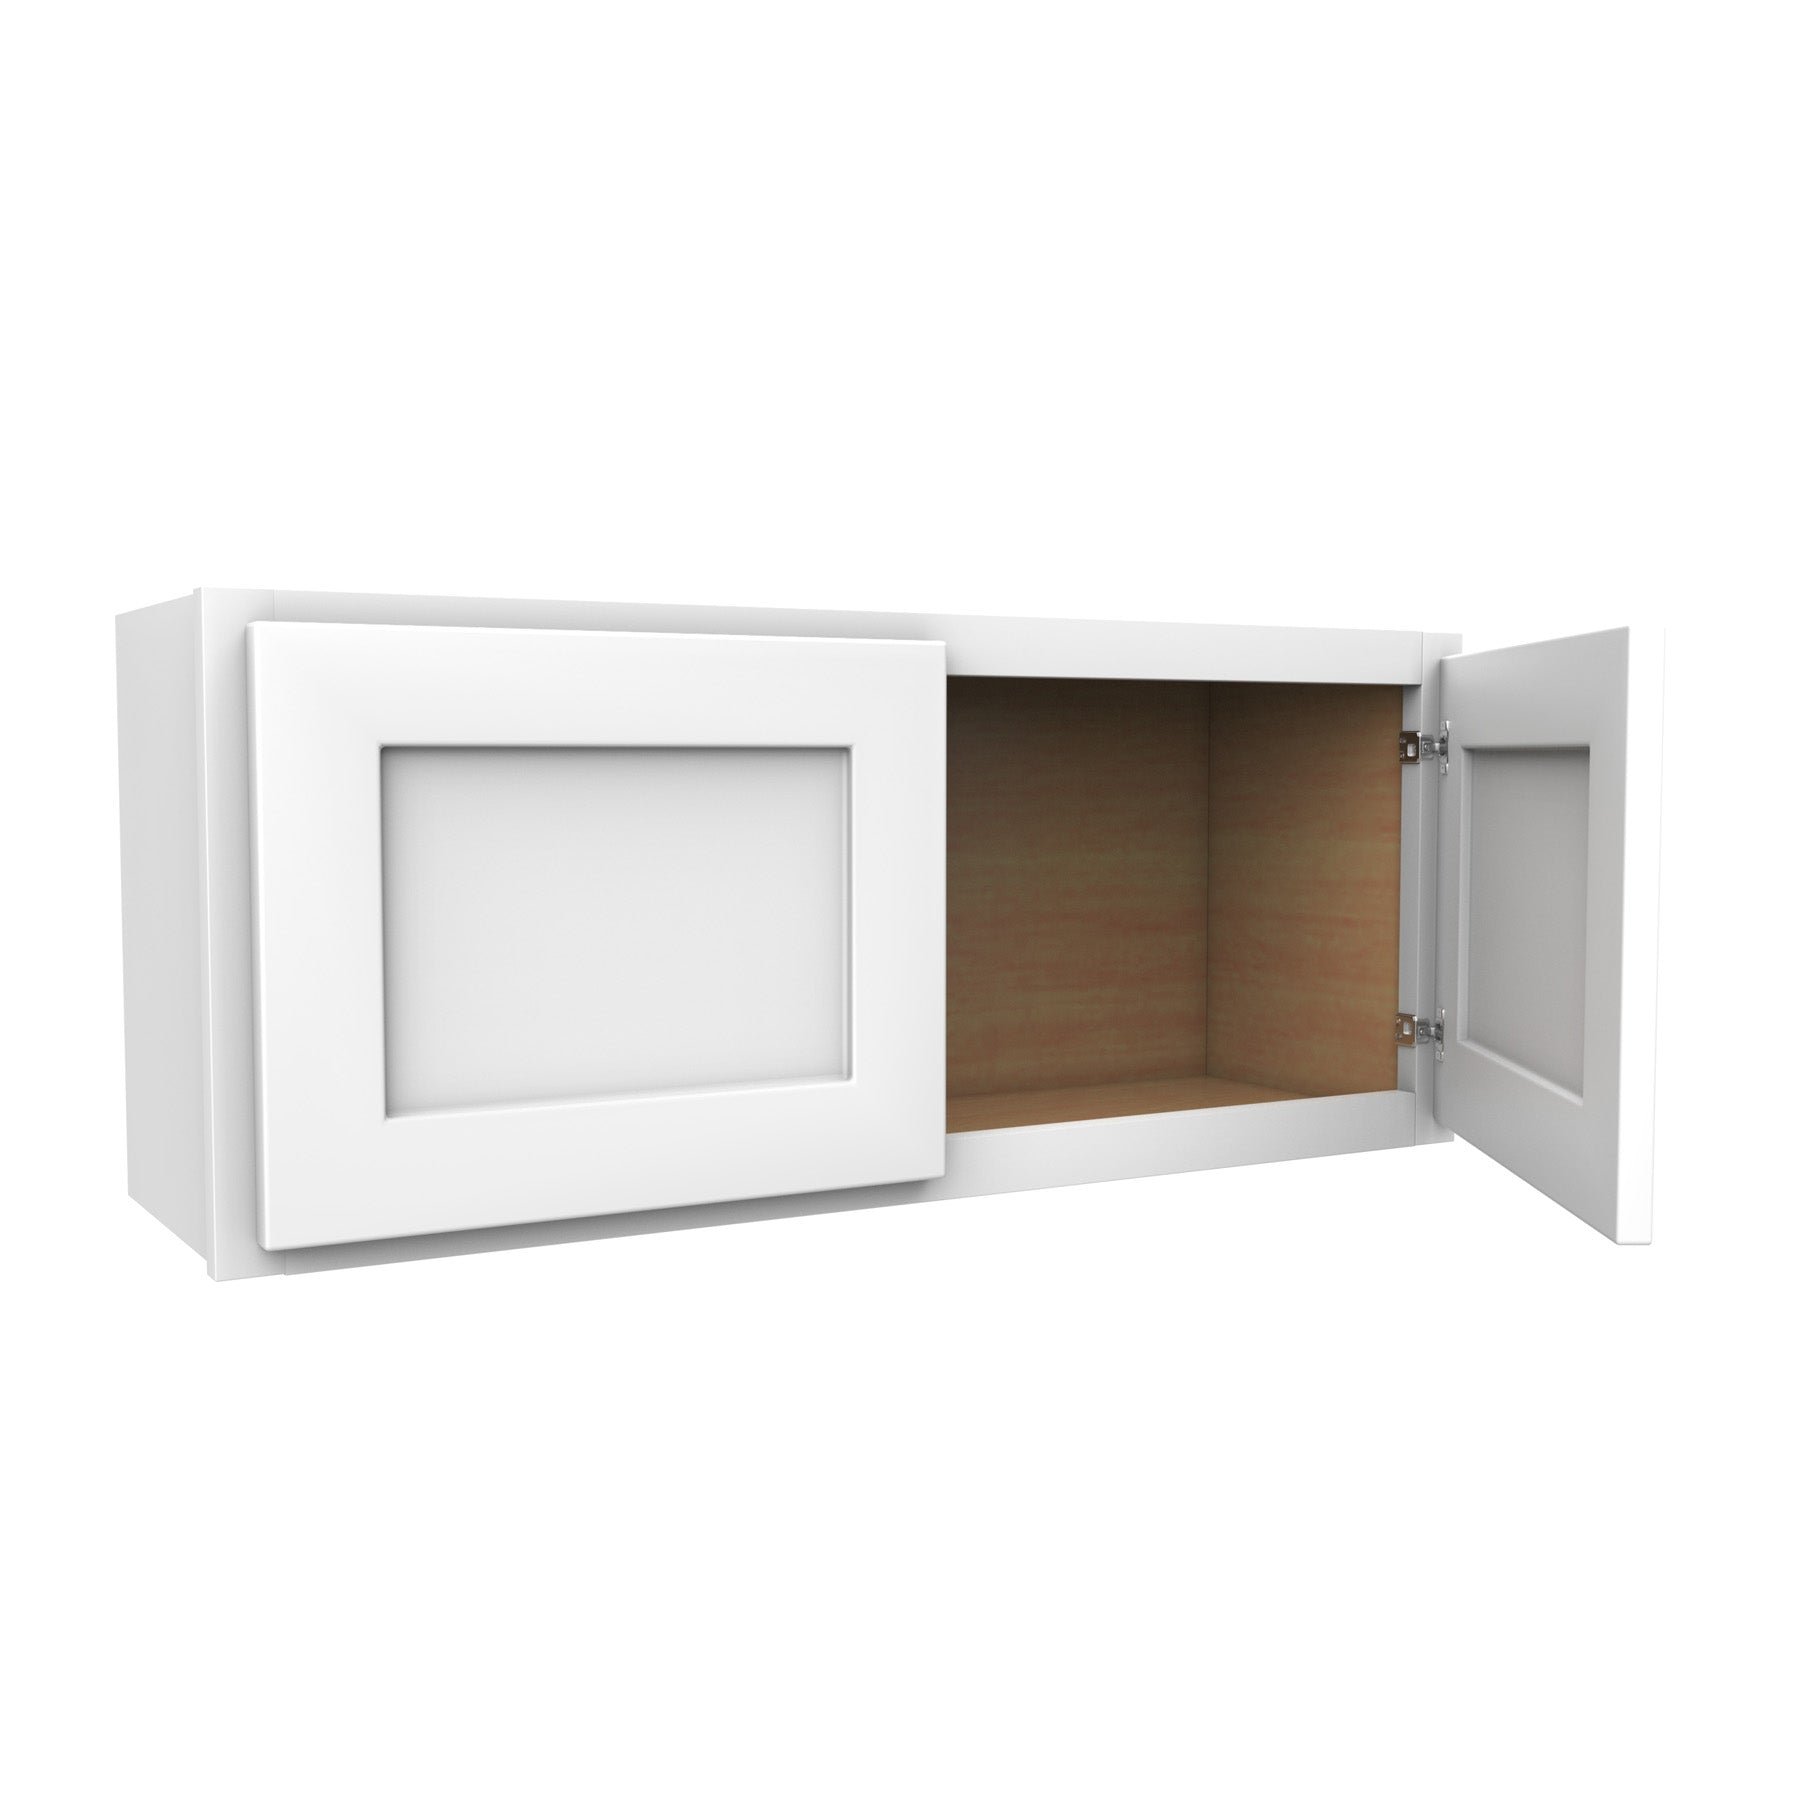 15 Inch High Double Door Wall Cabinet - Luxor White Shaker - Ready To Assemble, 36"W x 15"H x 12"D